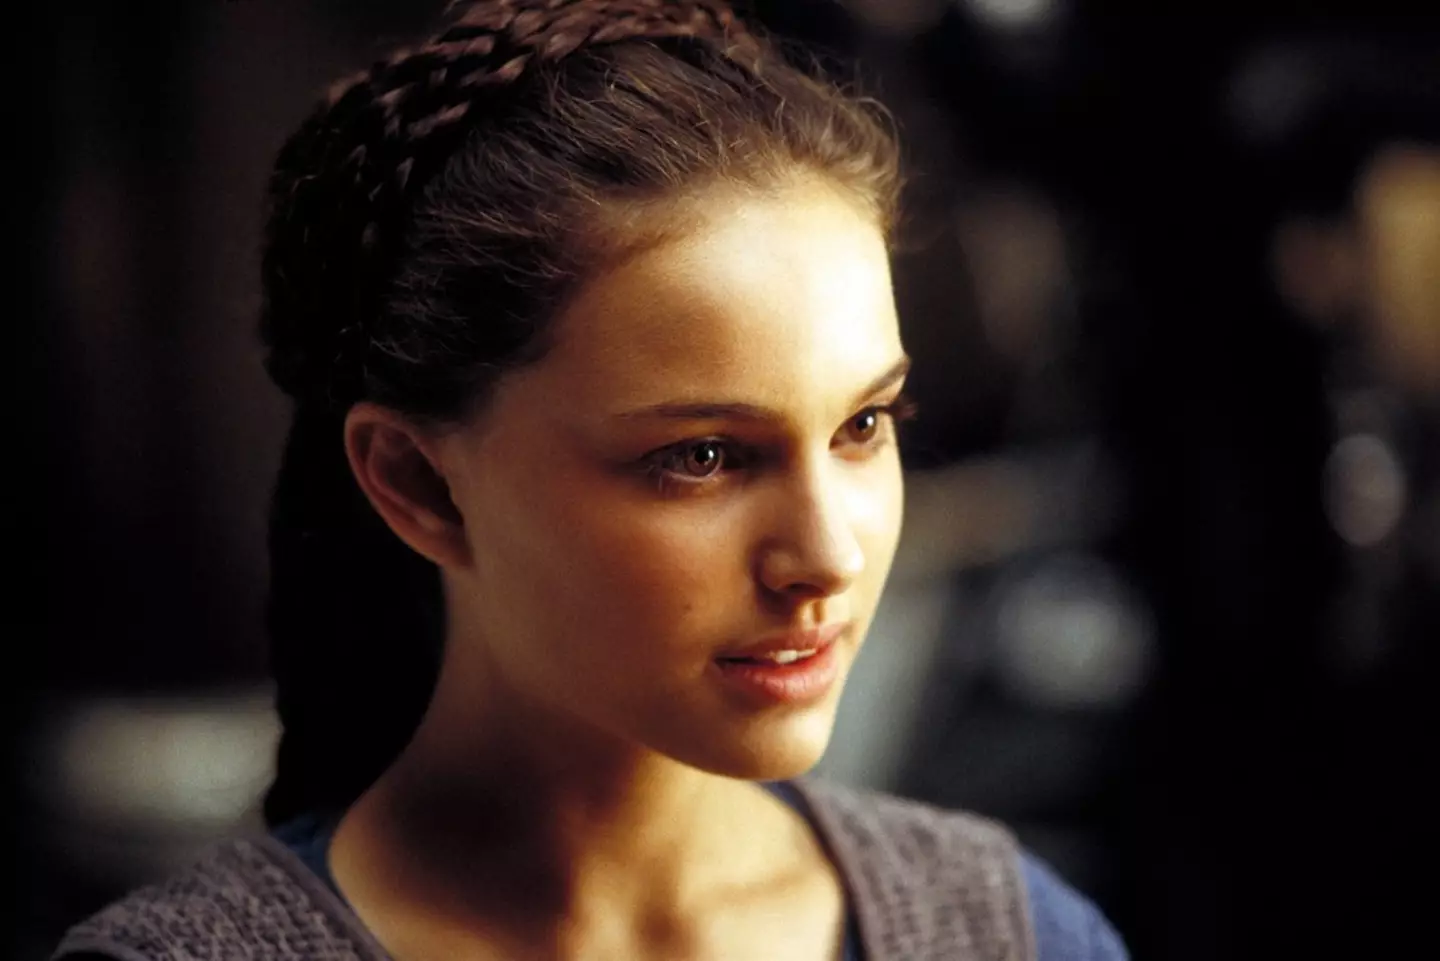 Natalie Portman portrayed Padme in Star Wars from 1999 to 2005.